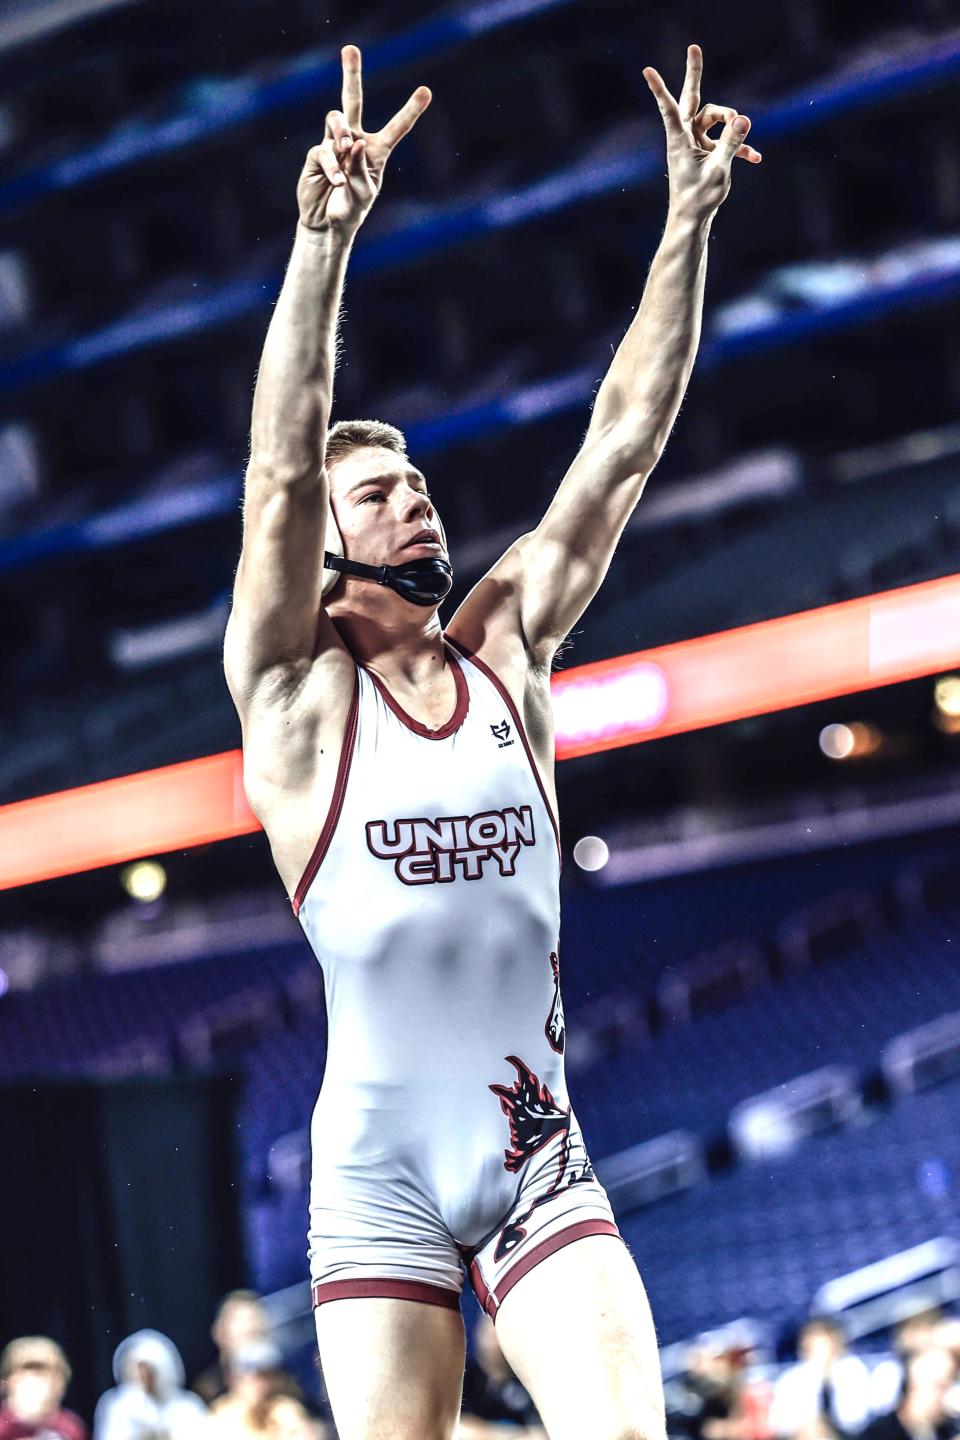 Union City junior Landyn Crance flashes the number two after winning his second straight state title at Ford Field. Crance brought home the title at 132 pounds after winning the 125 pound title last year